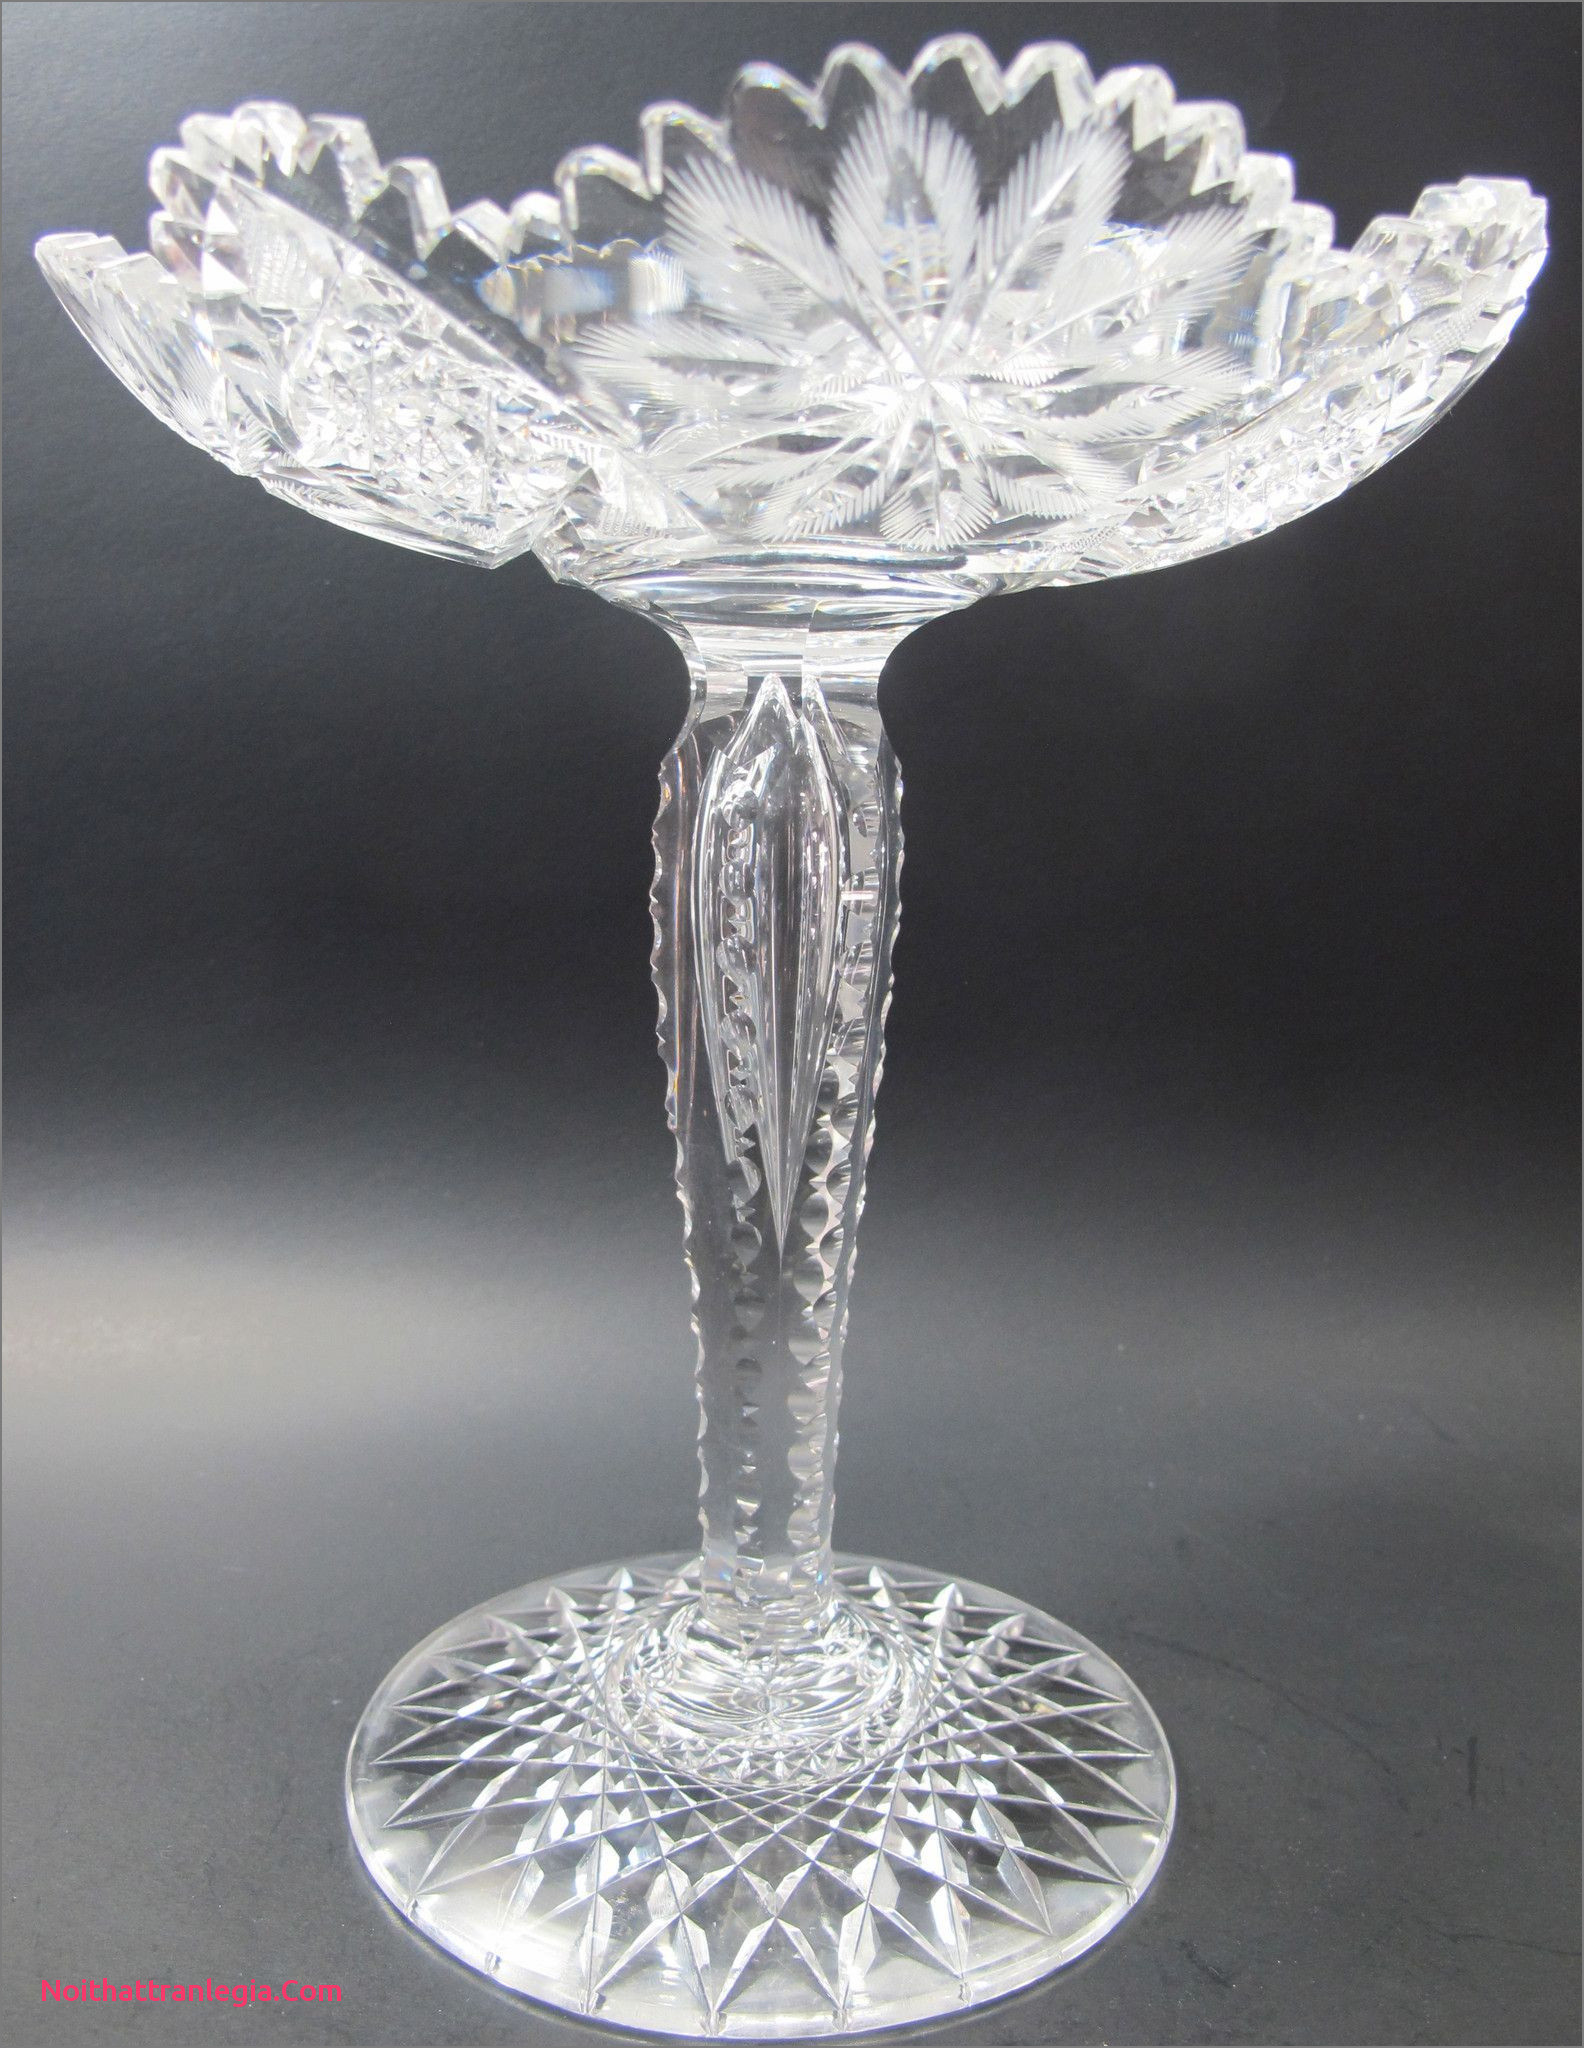 30 attractive Tall Clear Glass Pedestal Vase 2023 free download tall clear glass pedestal vase of 20 cut glass antique vase noithattranlegia vases design throughout fering this abp antique cut glass pote from the american brilliant period 1886 1916 9 5